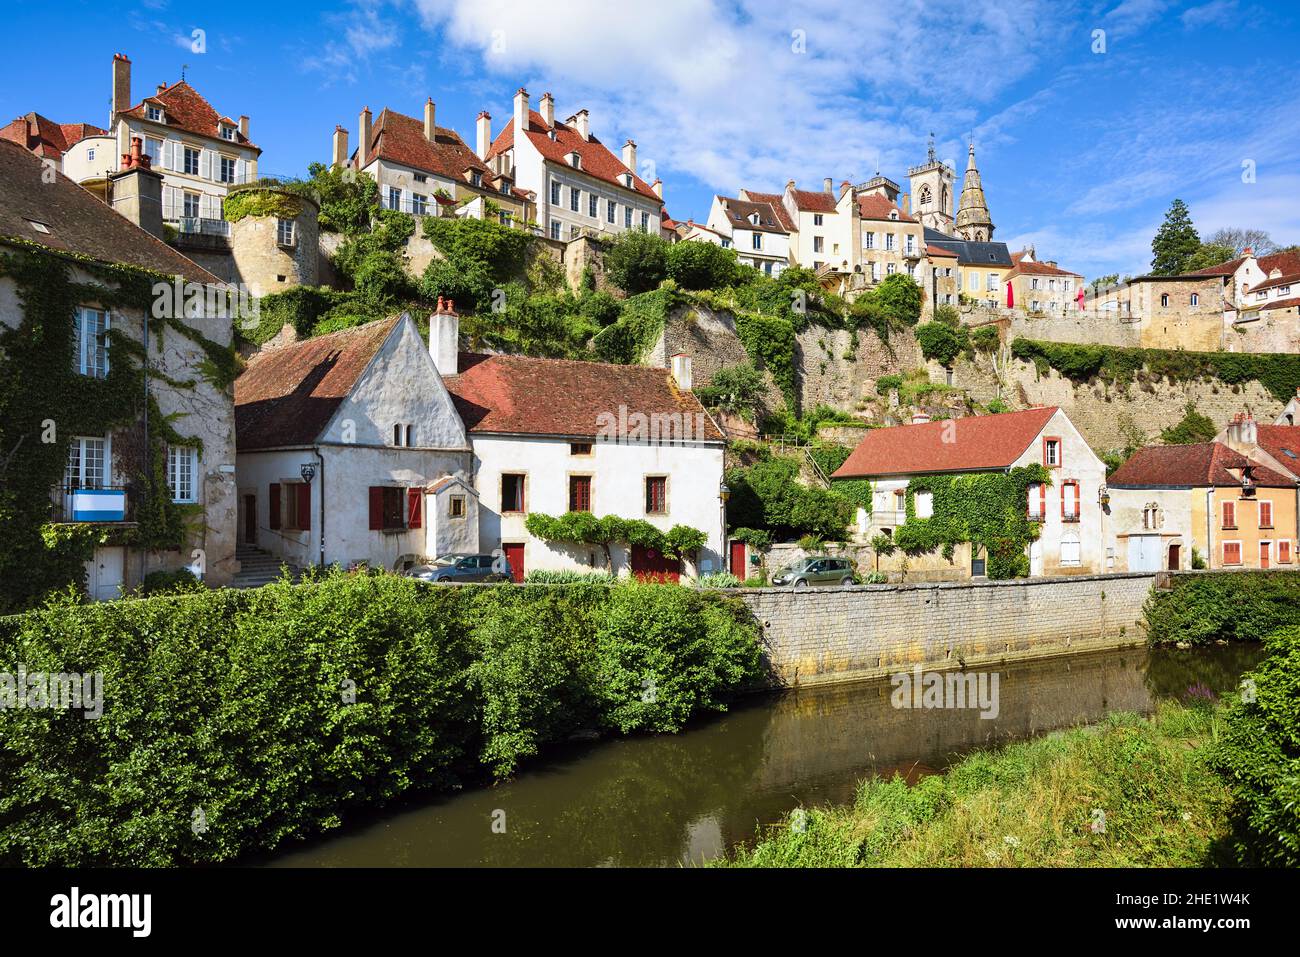 Historical Old town of medieval city of Semur en Auxois, Cote d'Or, Burgundy, France Stock Photo